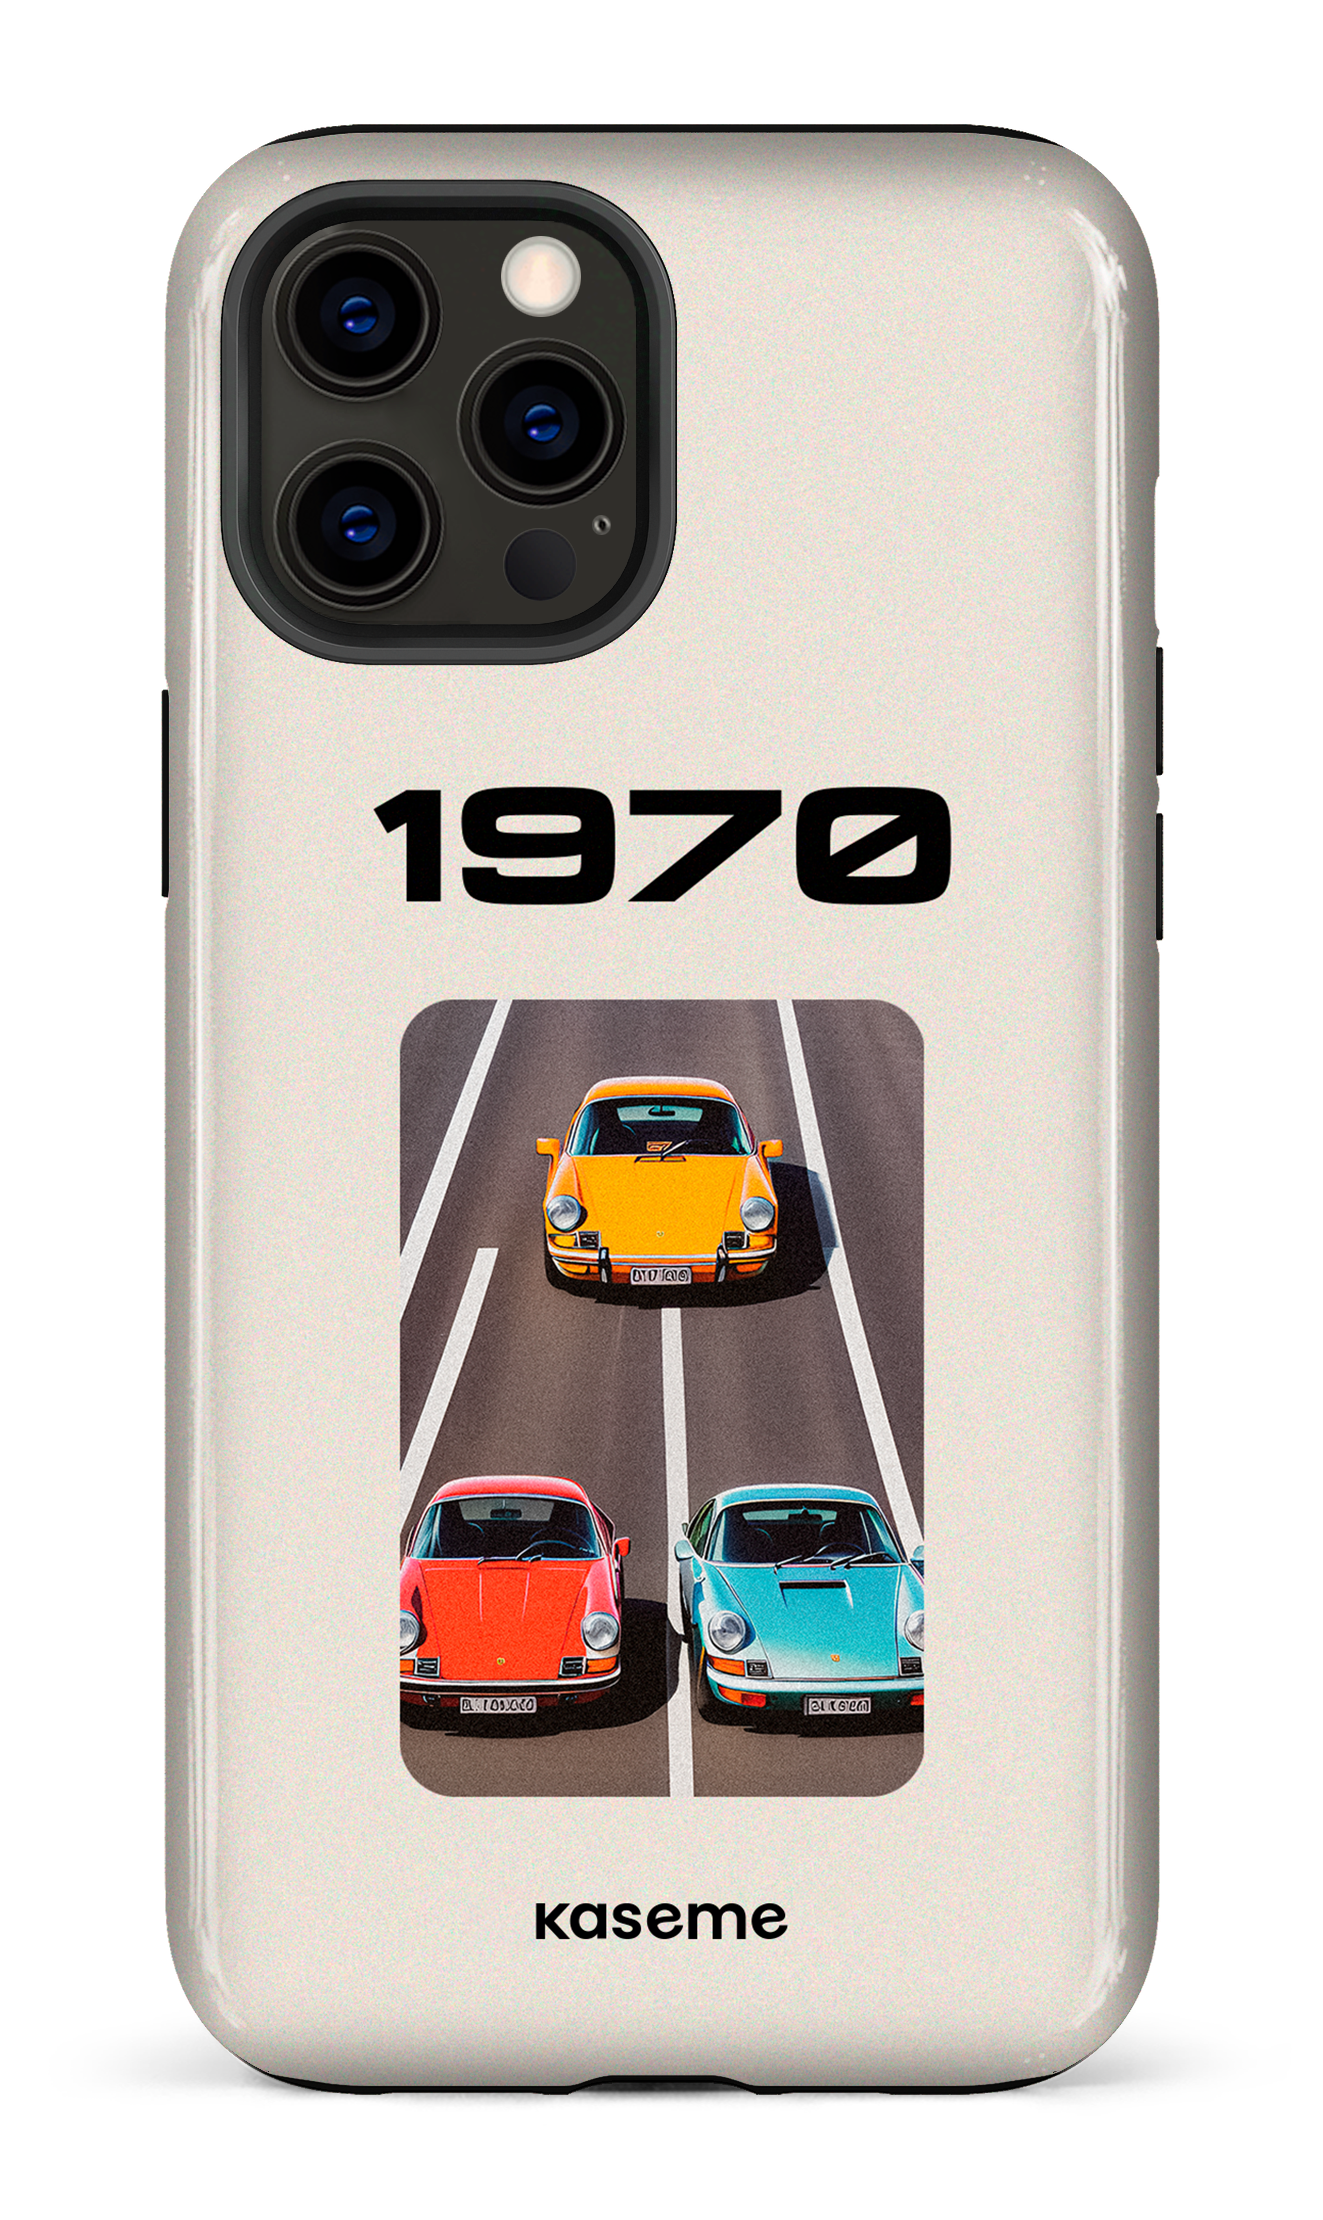 The 1970 - iPhone 12 Pro Max